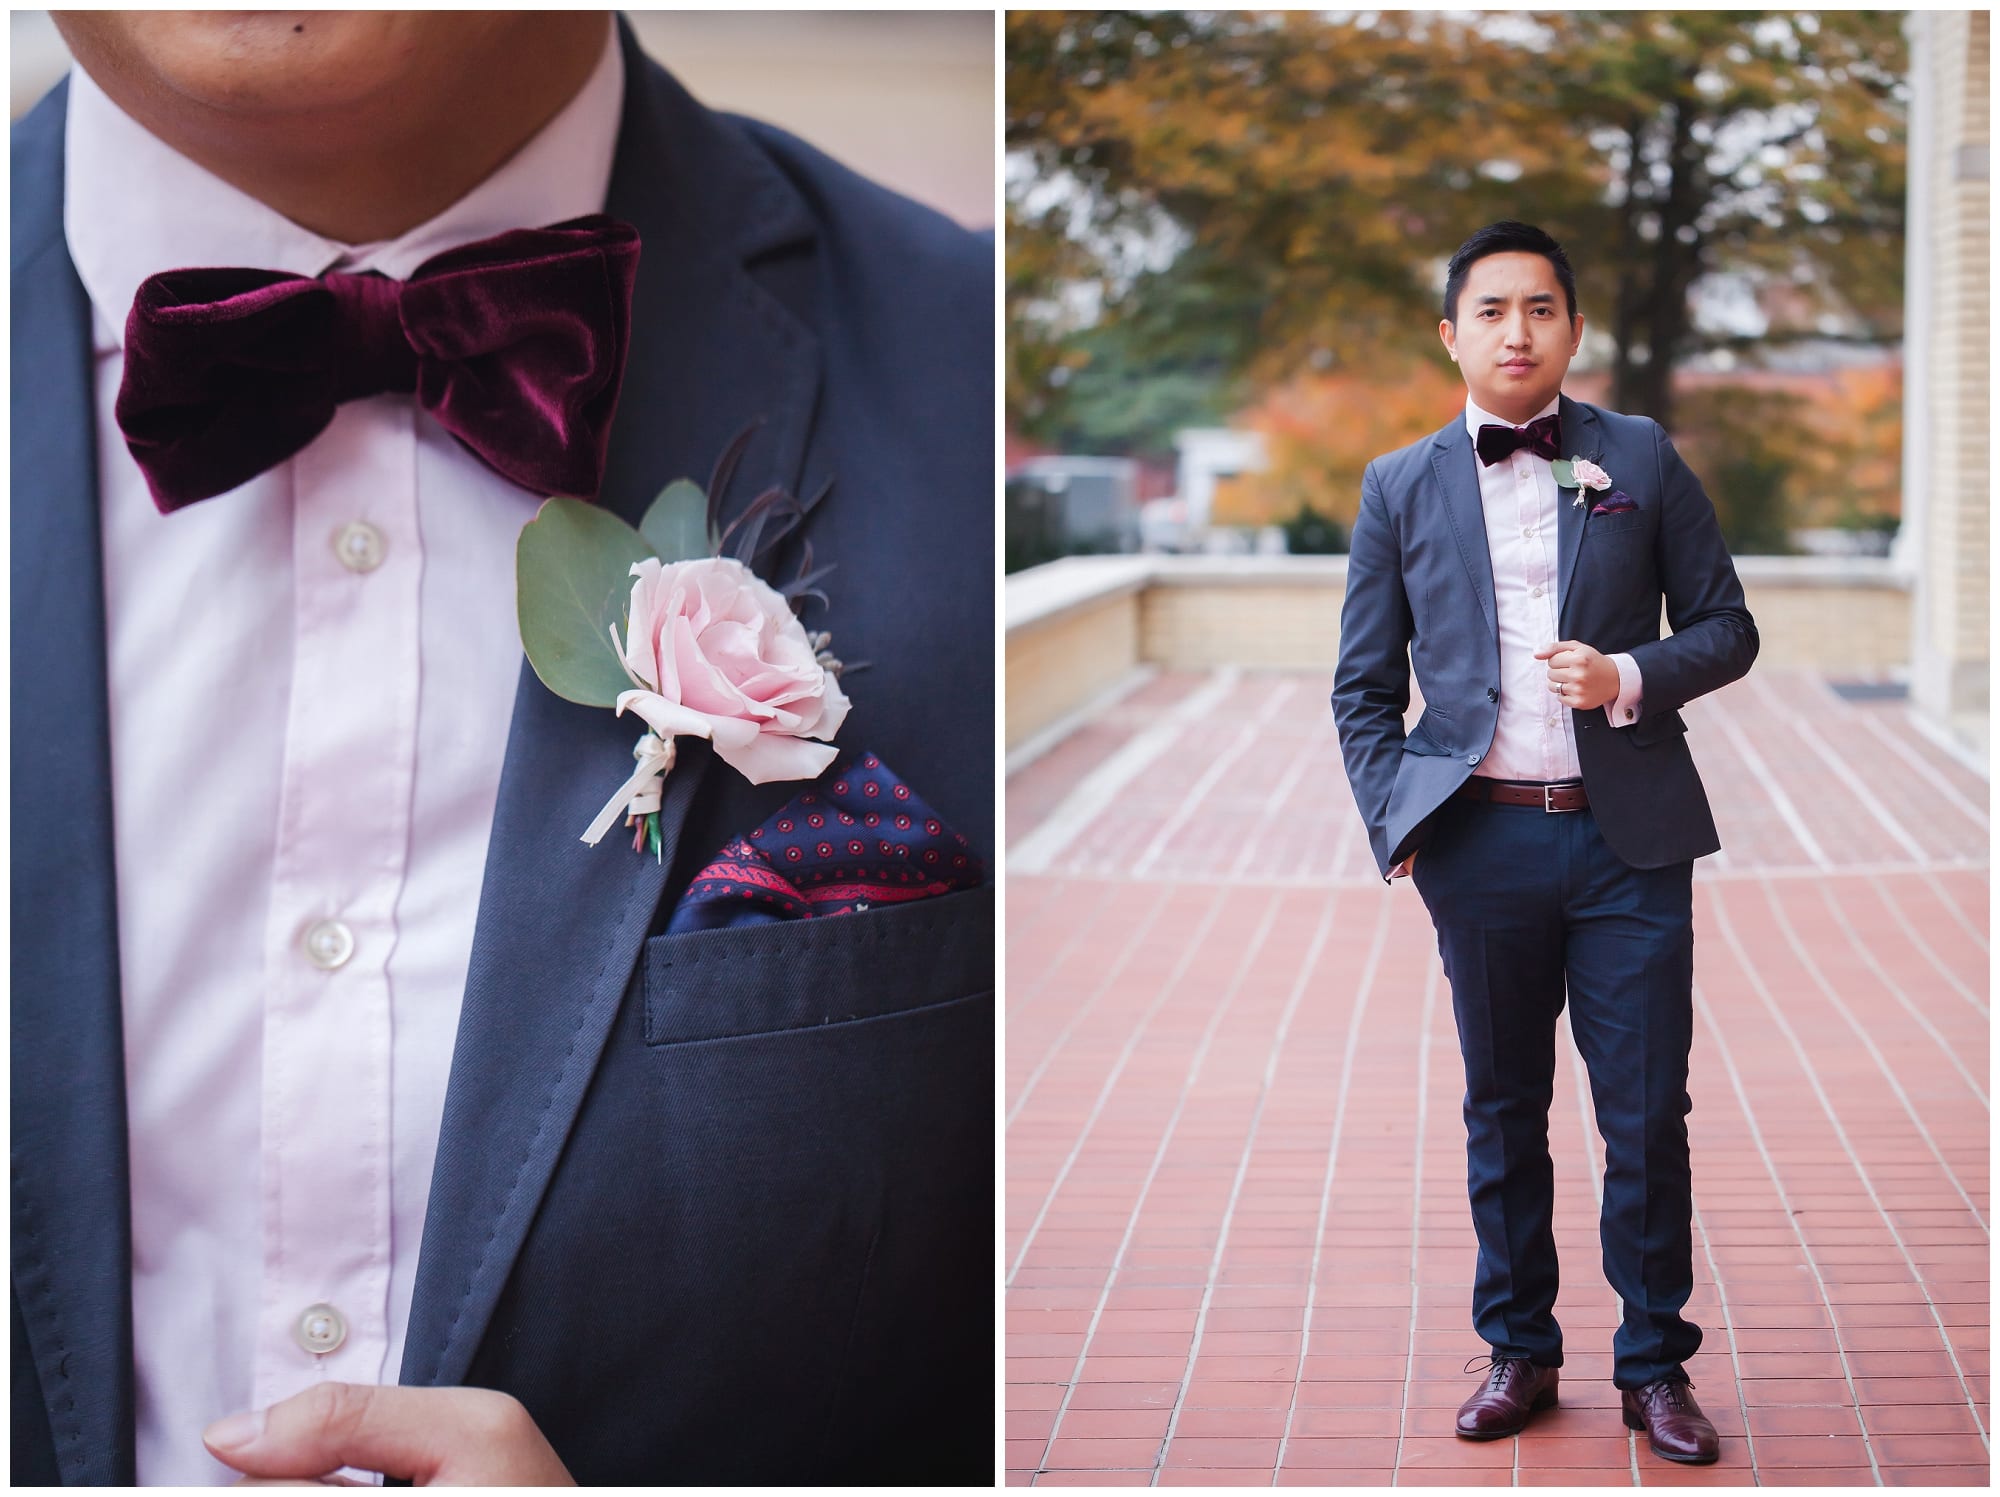 View More: http://caseyhphotos.pass.us/2014styledsessions